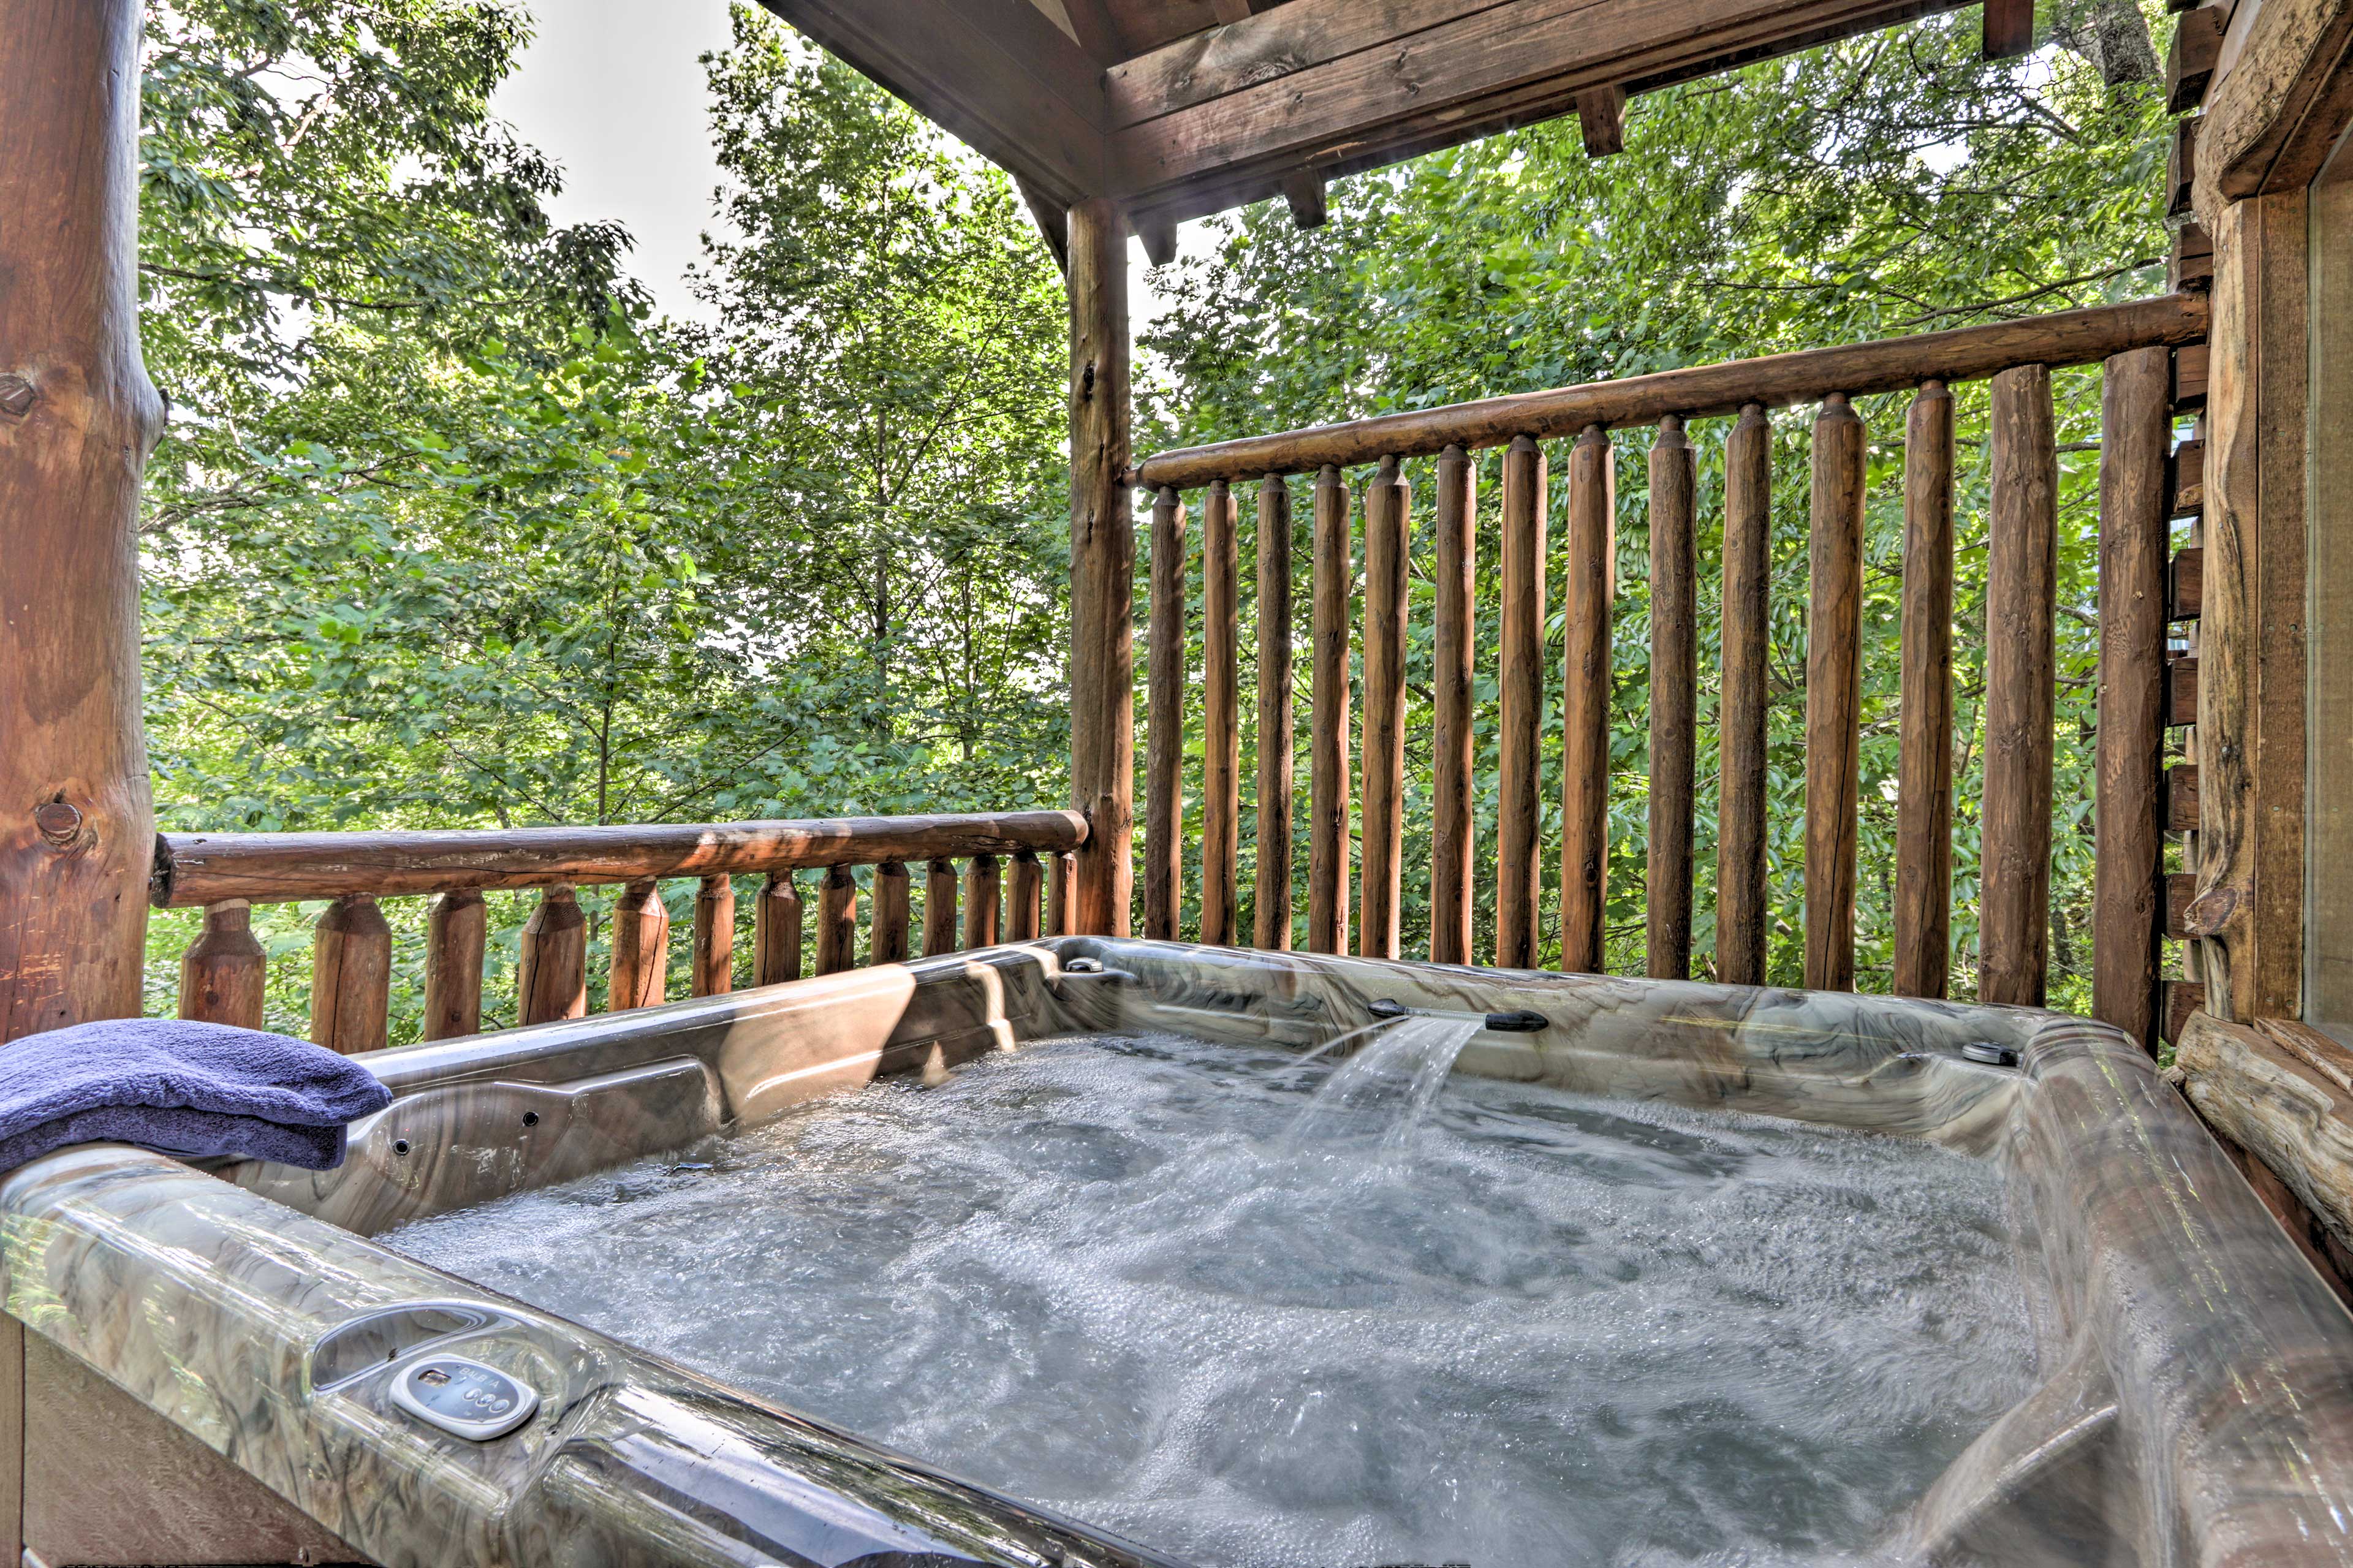 Take a soak in the private hot tub on the deck!